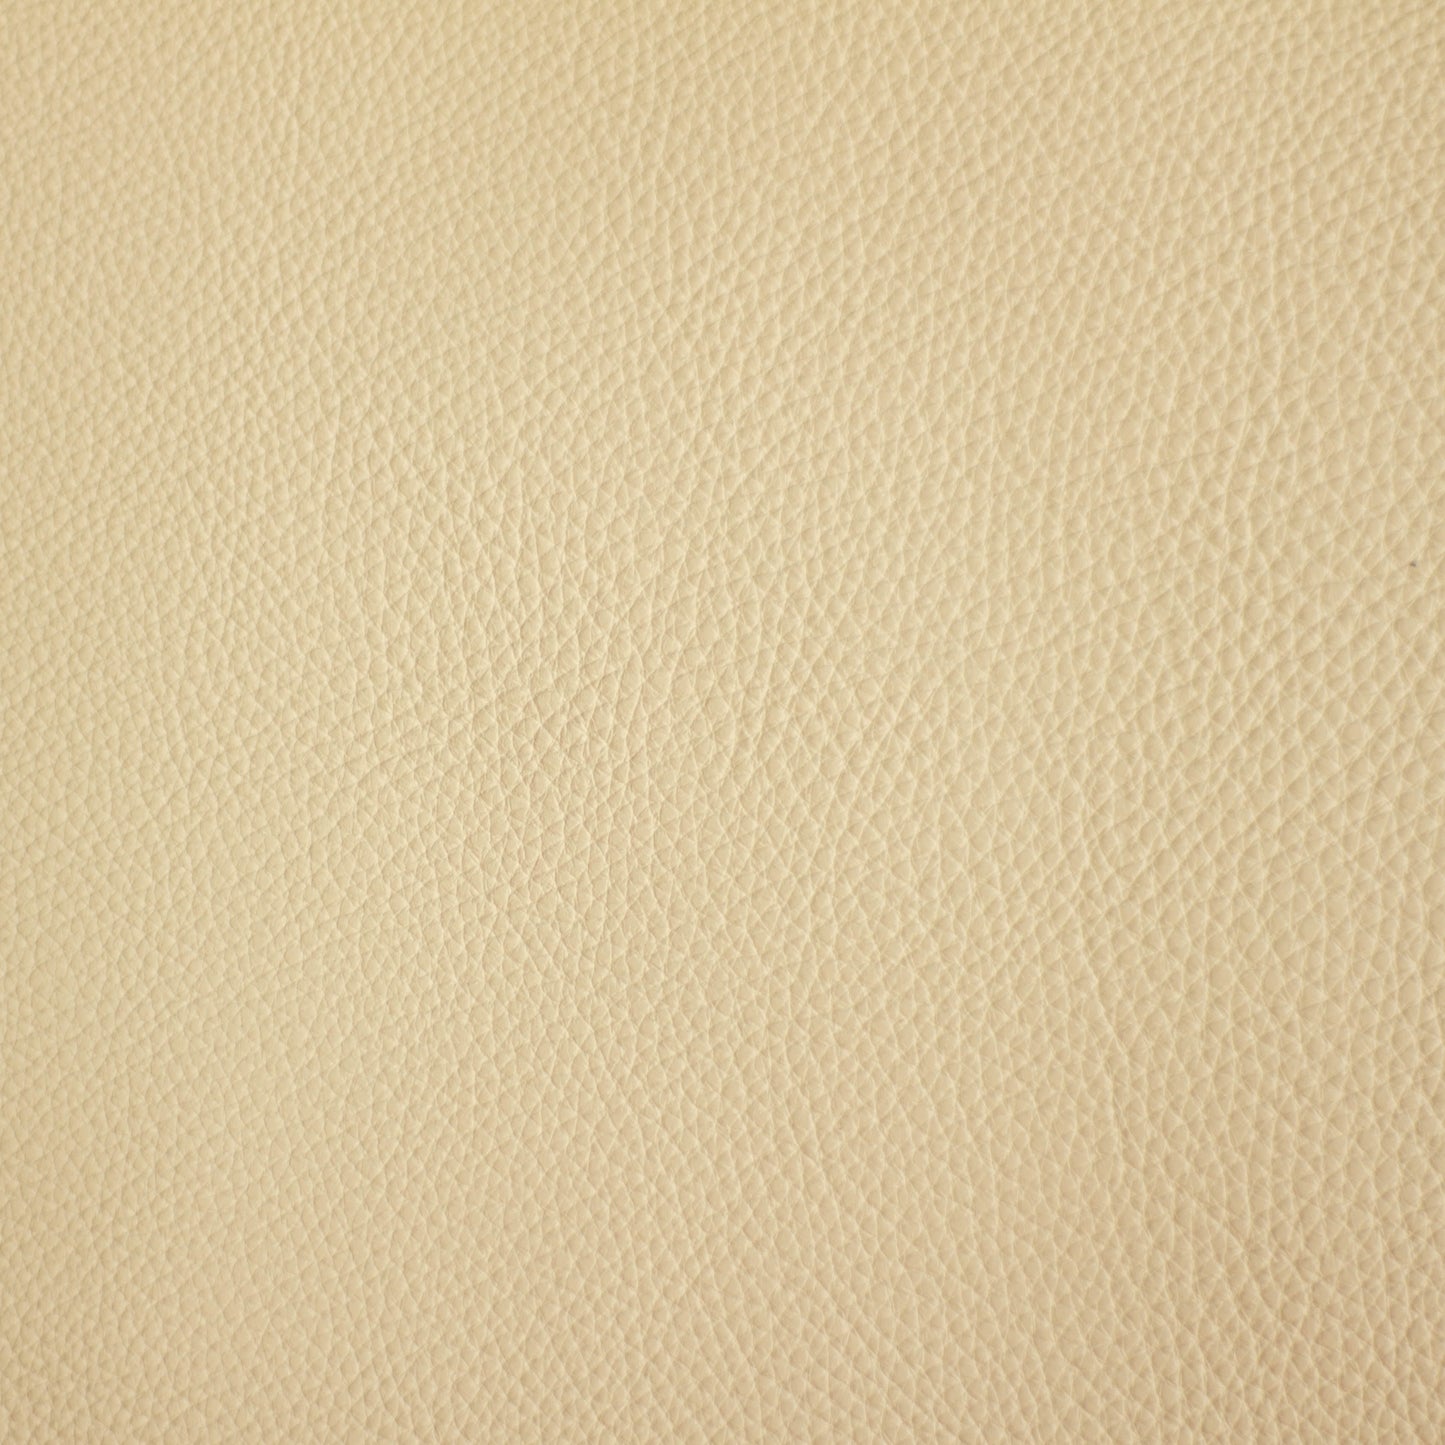 Cityscape, Cream, Spilltop® Water Resistance, Hospitality Leather Hide